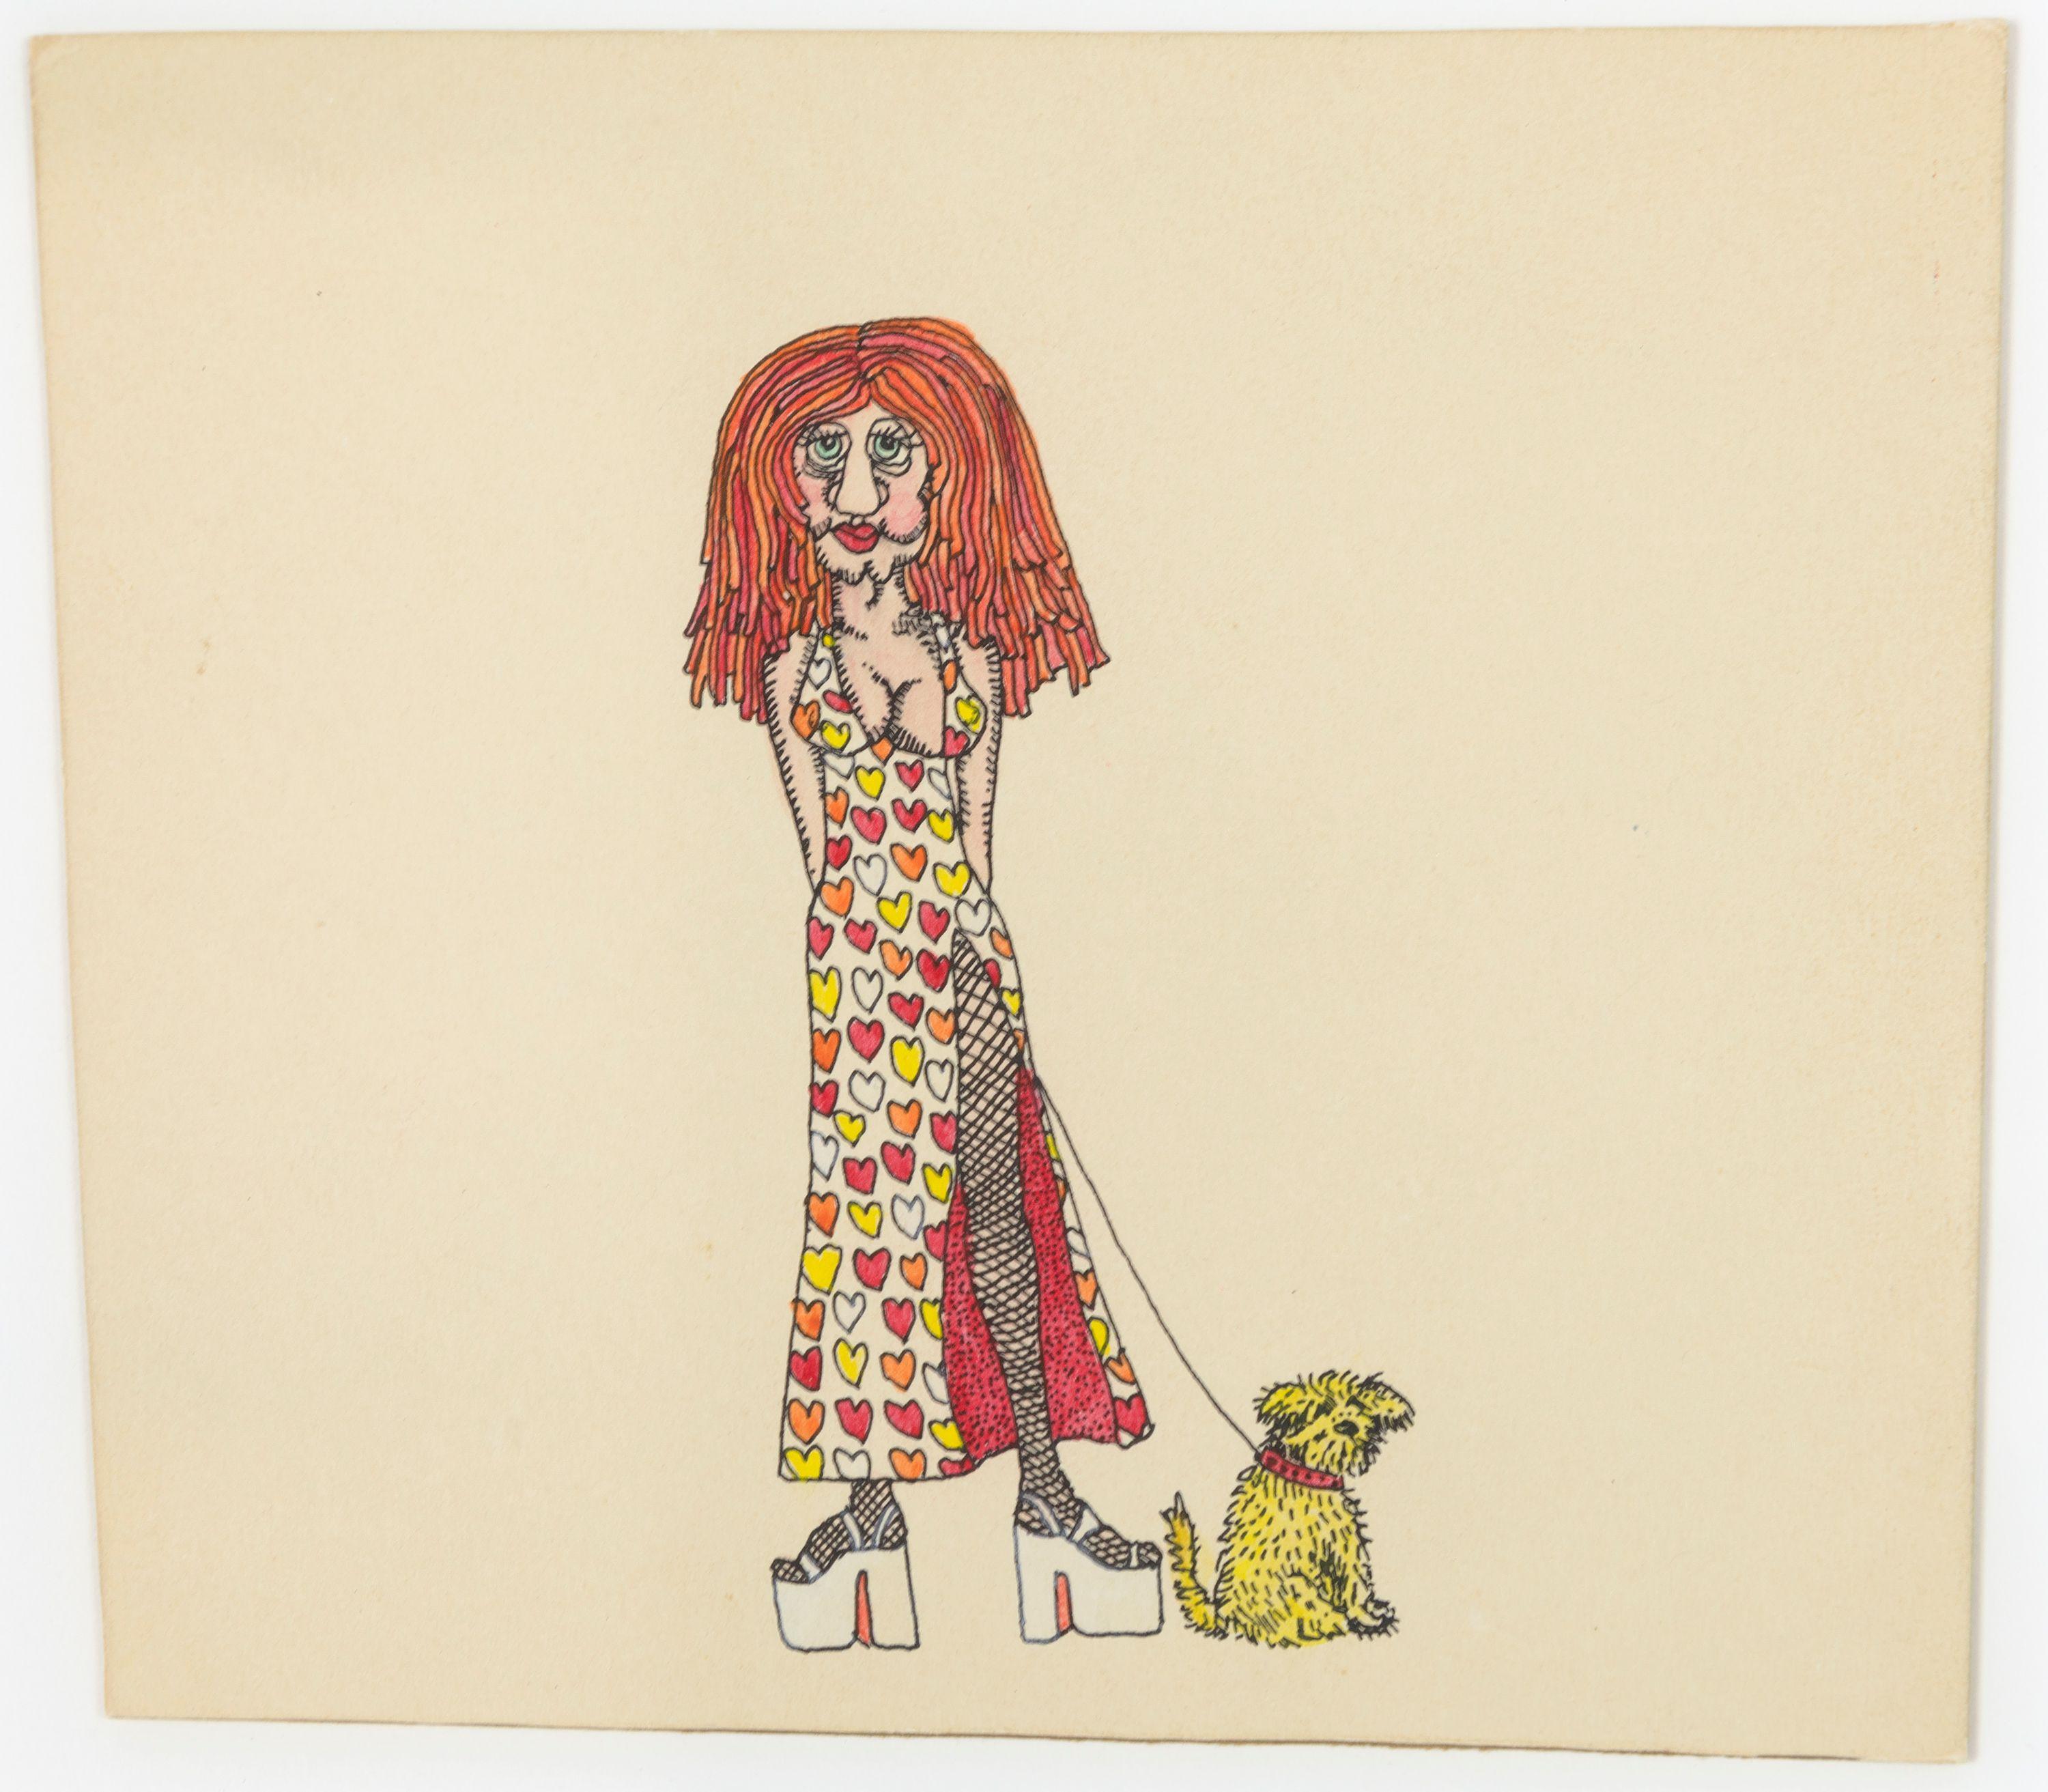 HARING, KEITH Figurative Art - Untitled (Queen of Hearts with Dog on Leash)